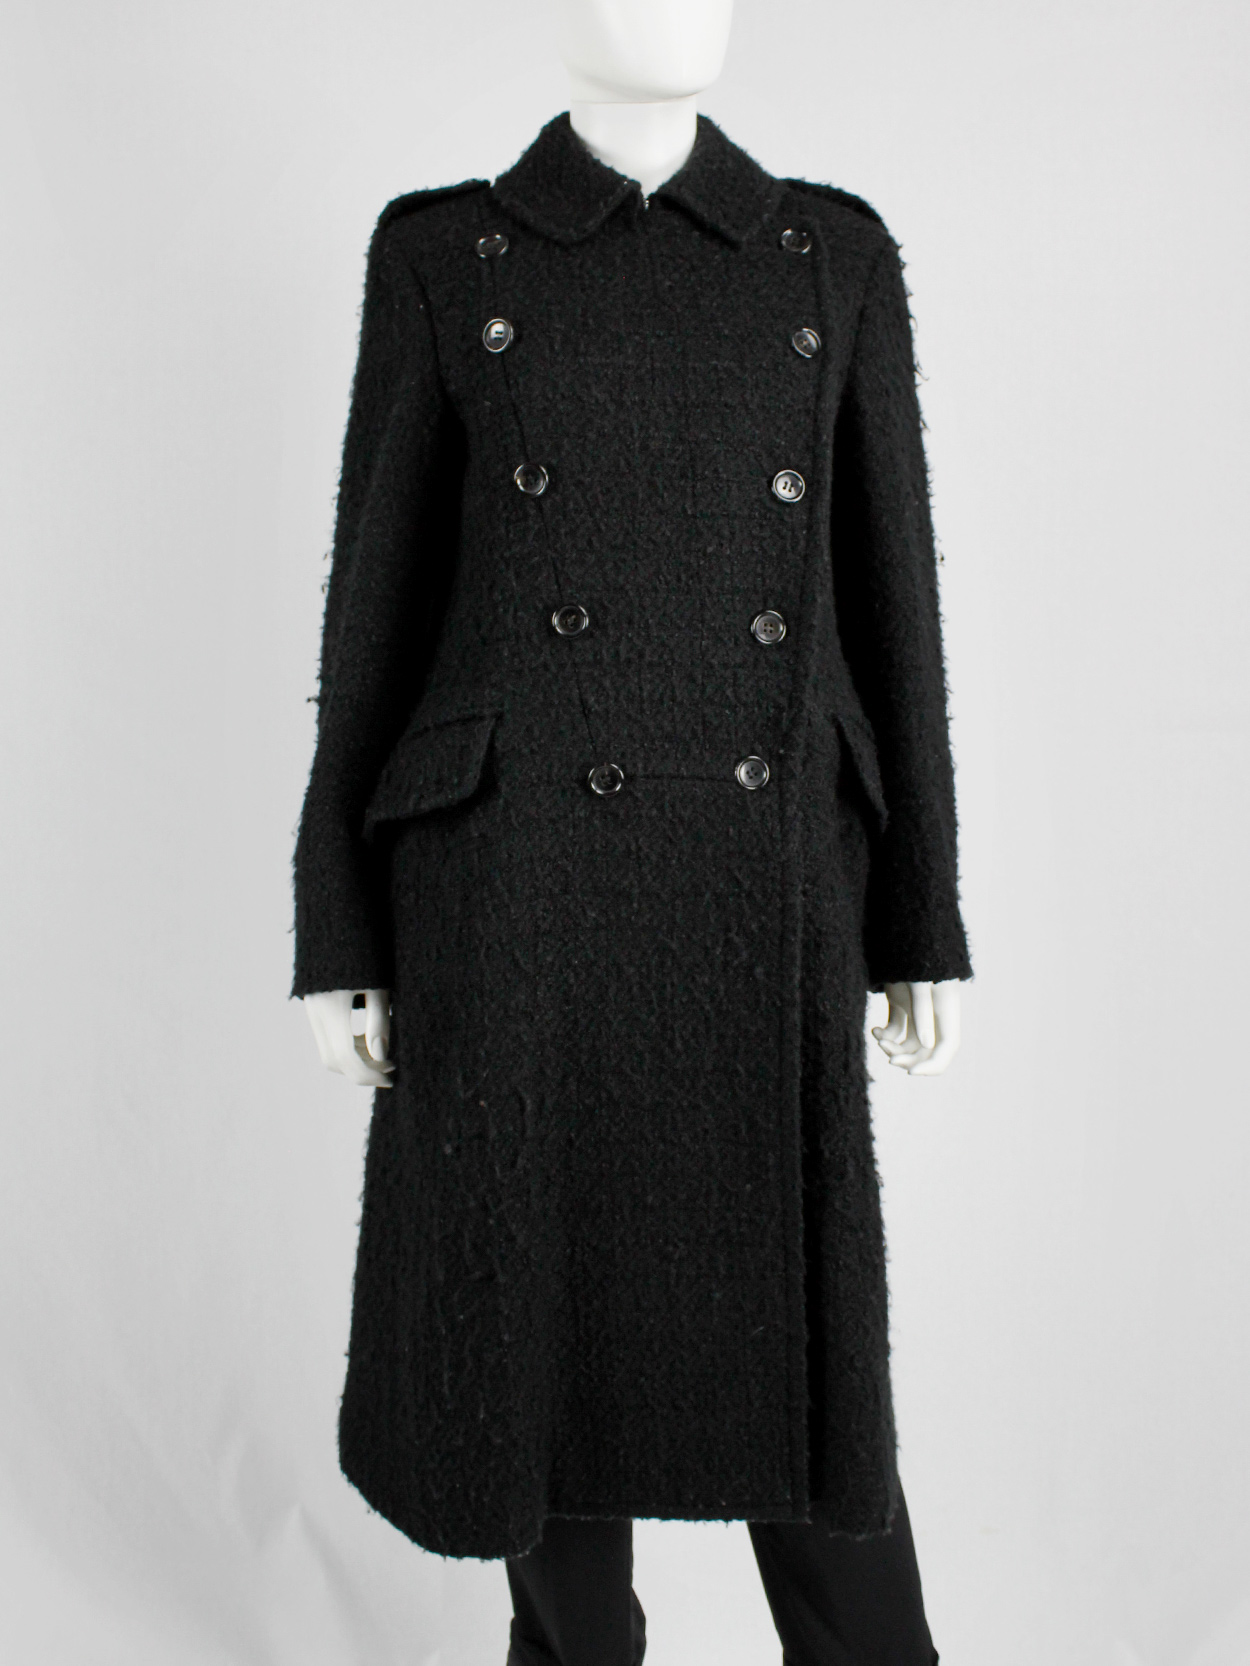 Comme des Garçons tricot black double breasted military-style coat